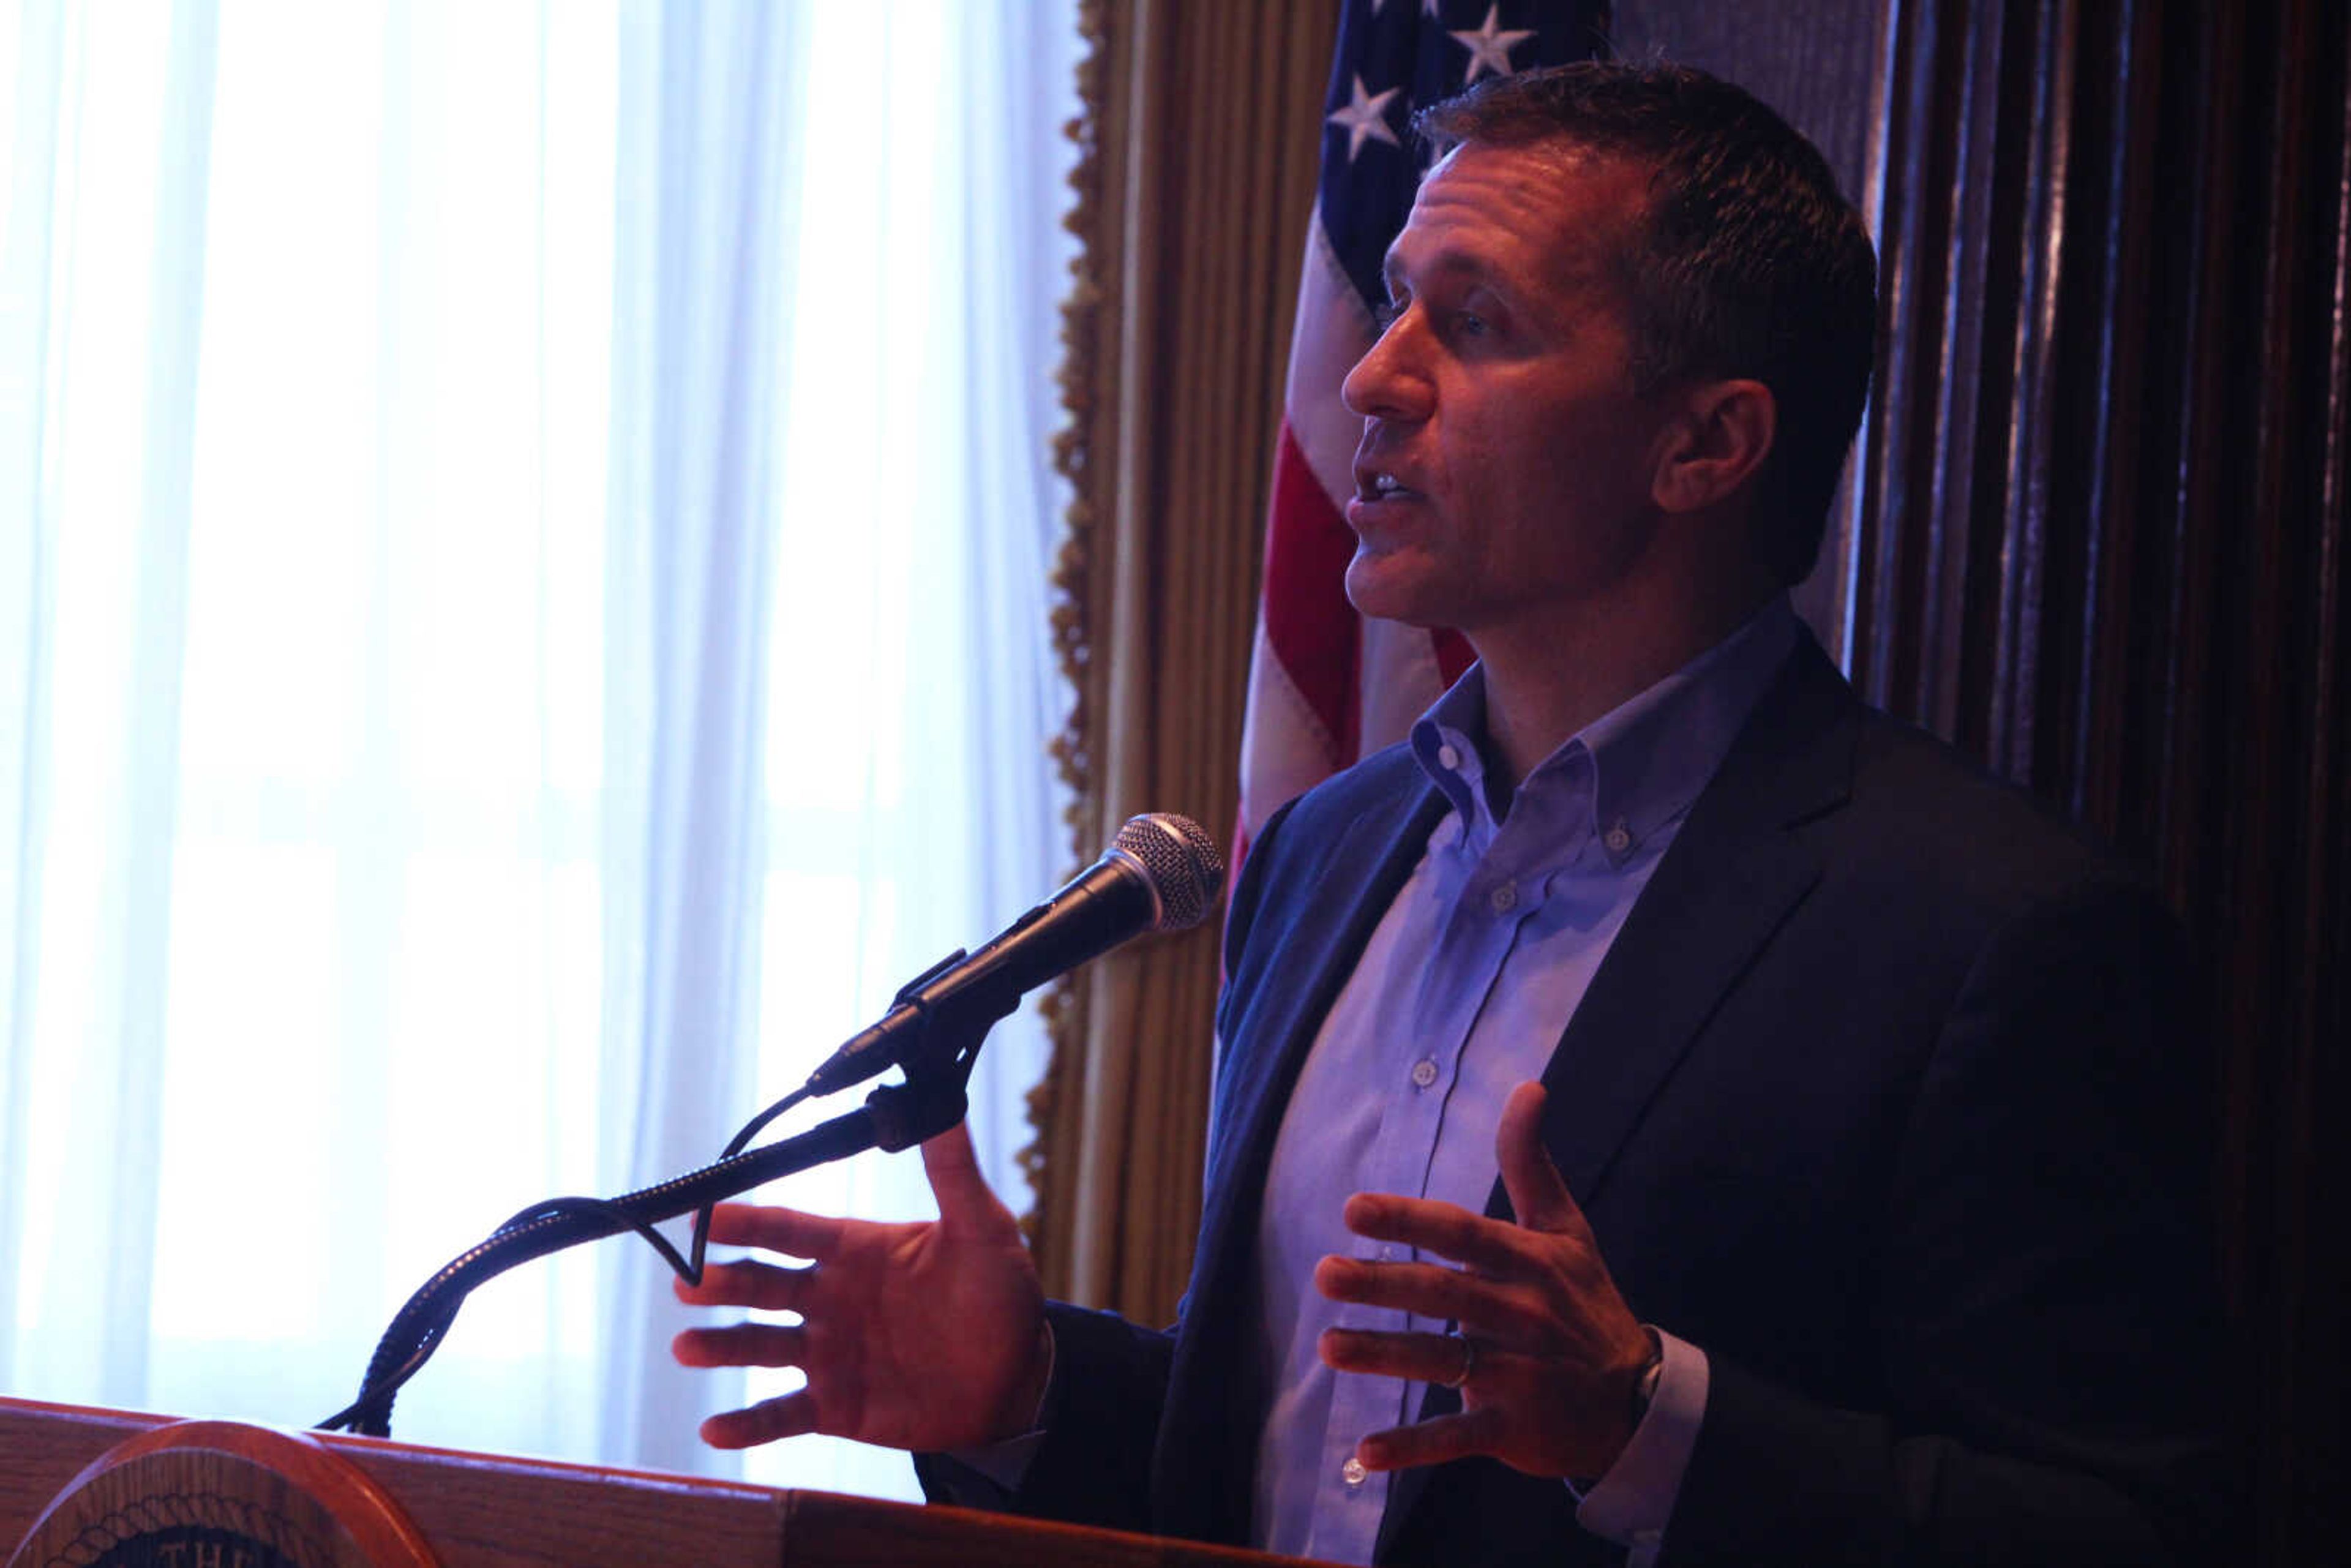 Missouri governor Eric Greitens speaks at a press conference to address the release of a committee investigation on his recent his recent sex scandal at the Missouri Capitol Building on April 11.